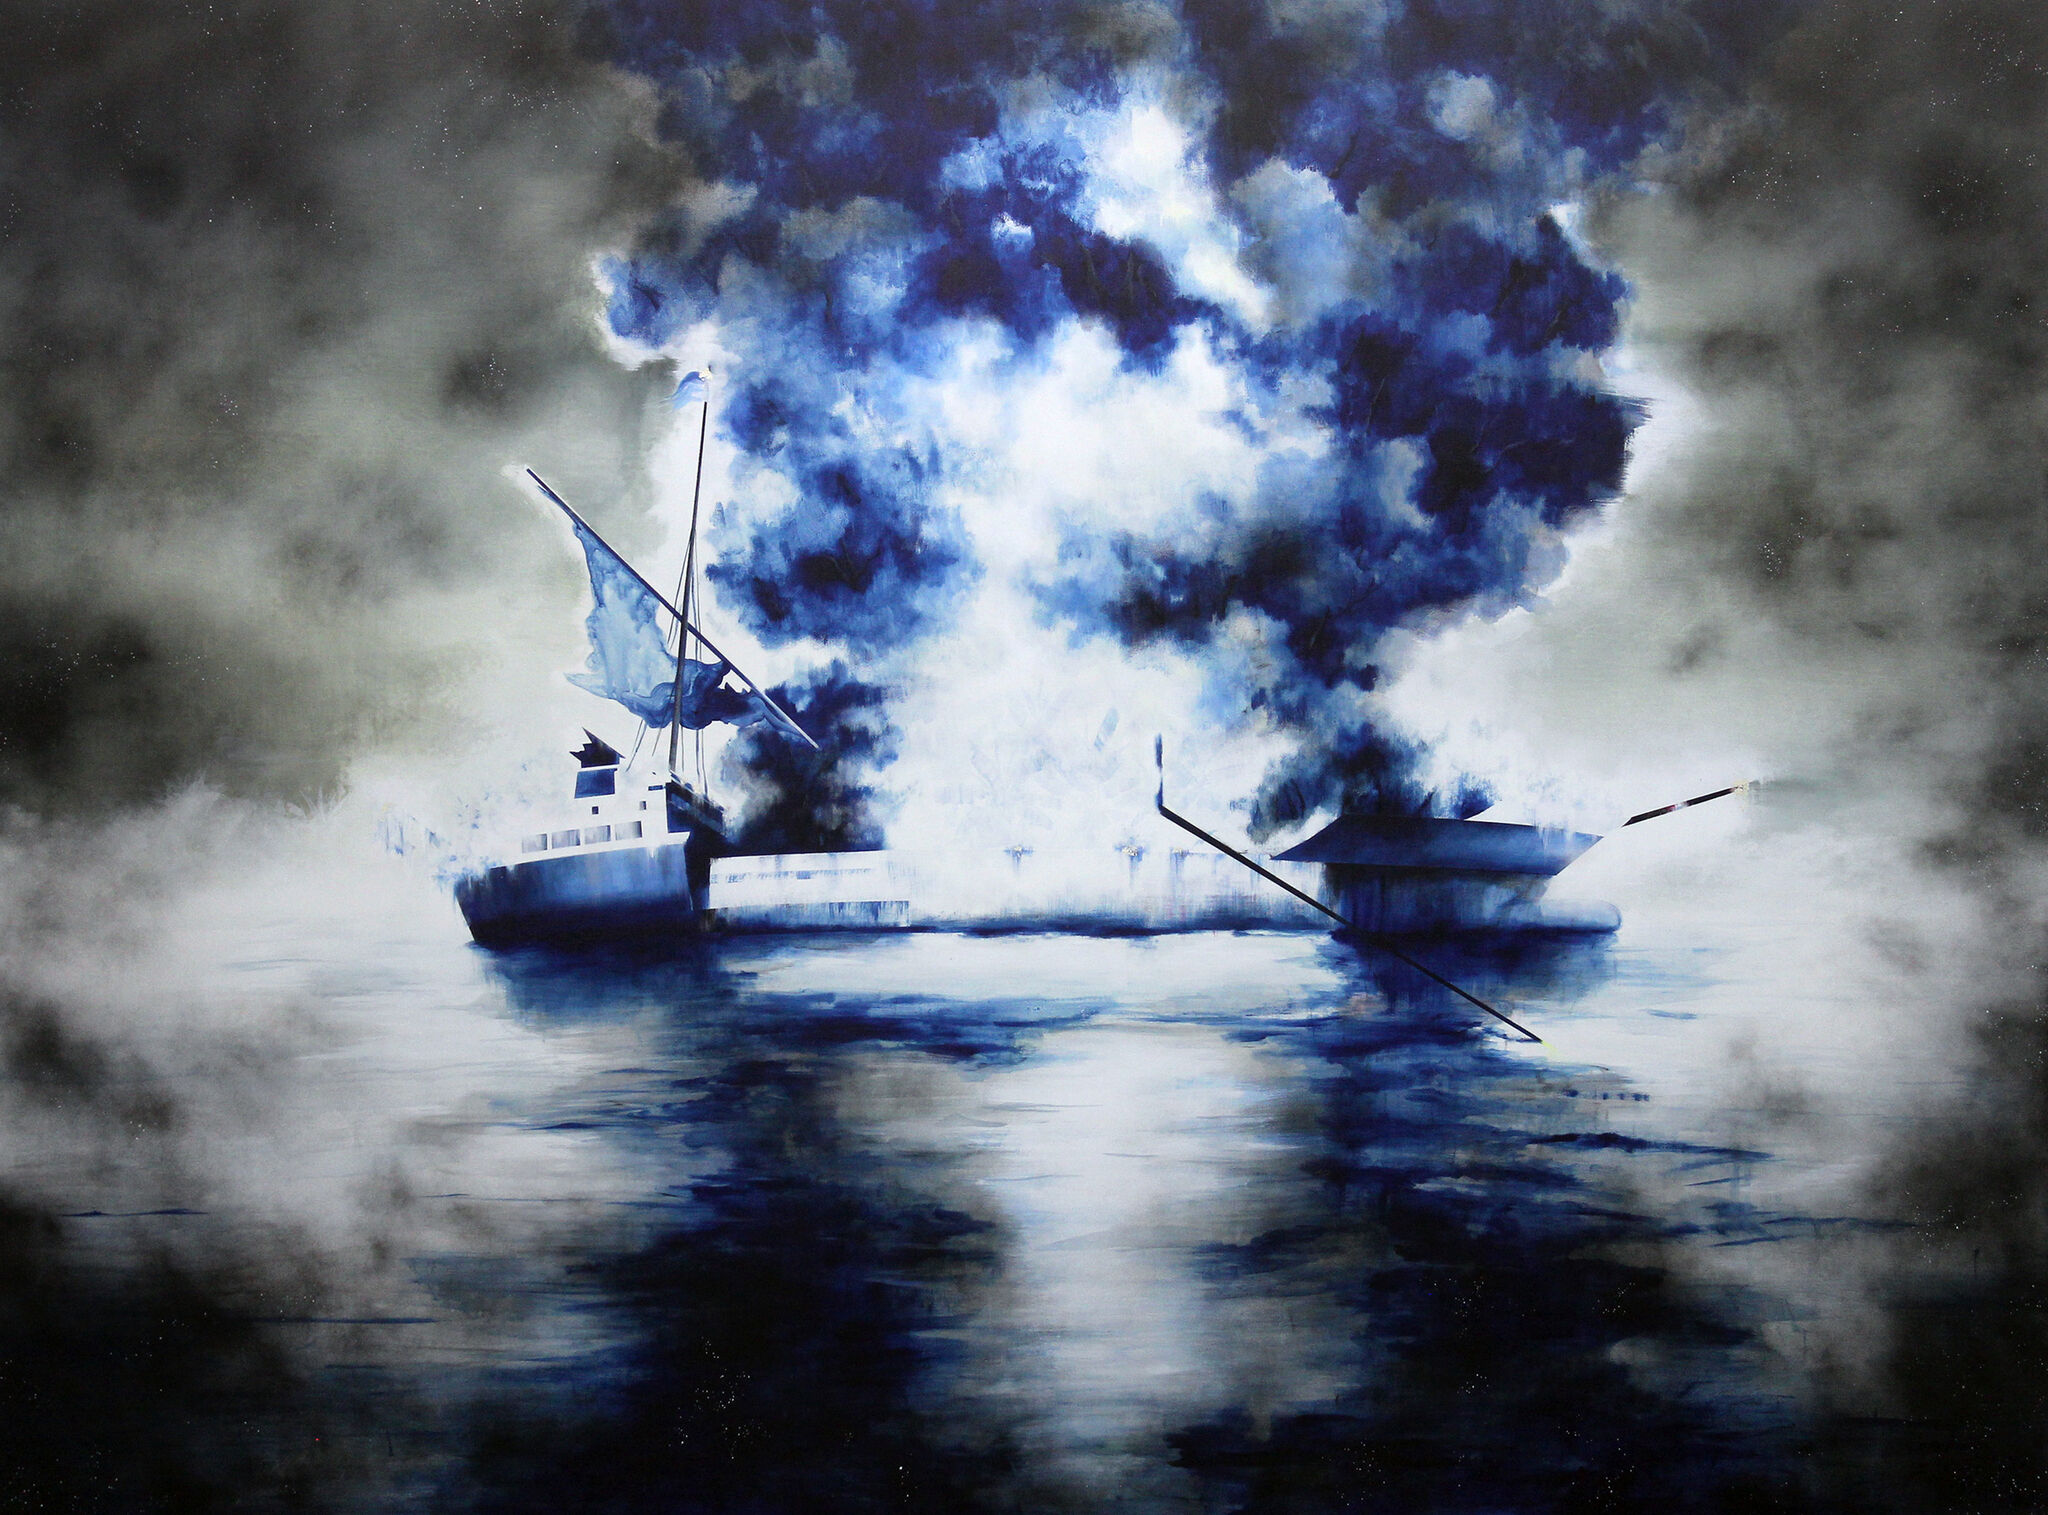 A ship consumed in a large plume of blue and white smoke, against a smoky gray sky.